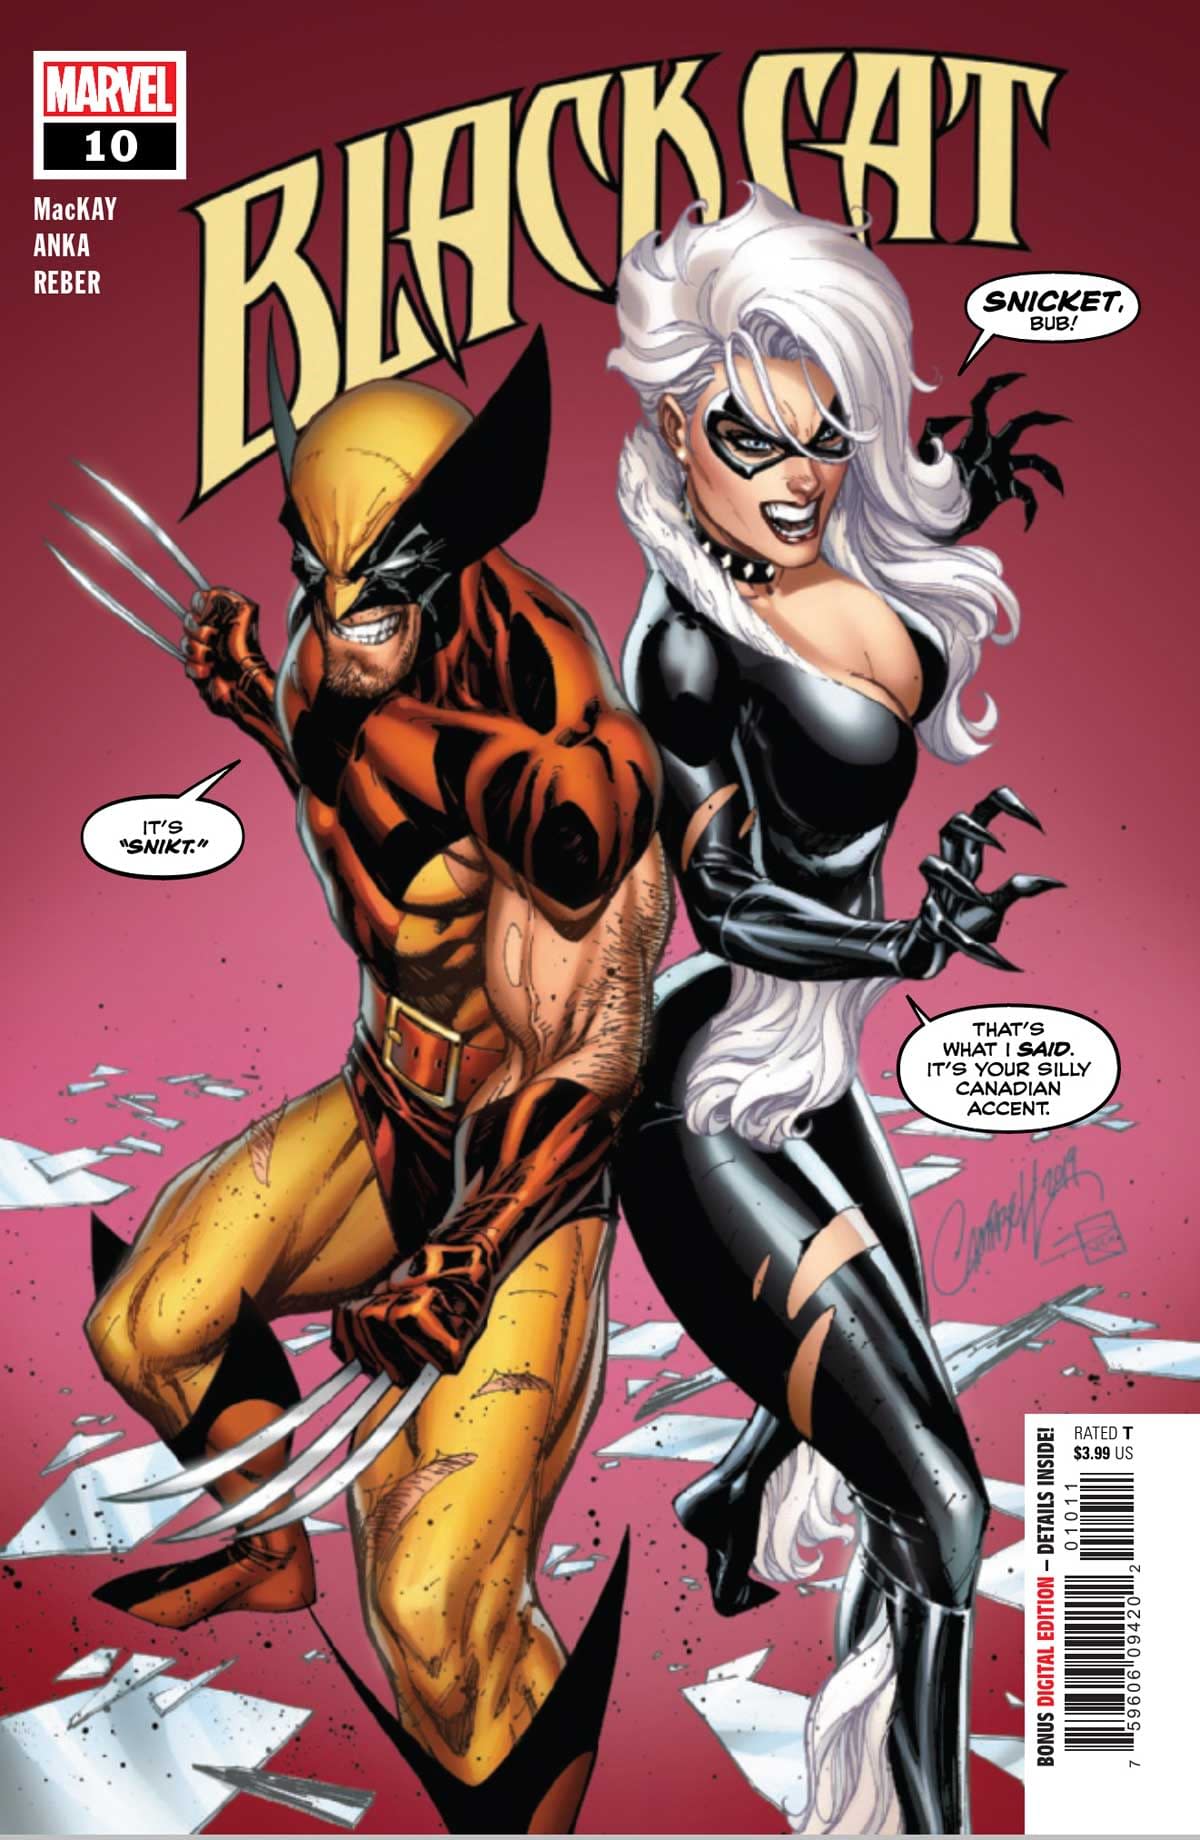 REVIEW: Black Cat #10 -- "This Is One Madripoor Vacation You'll Love"